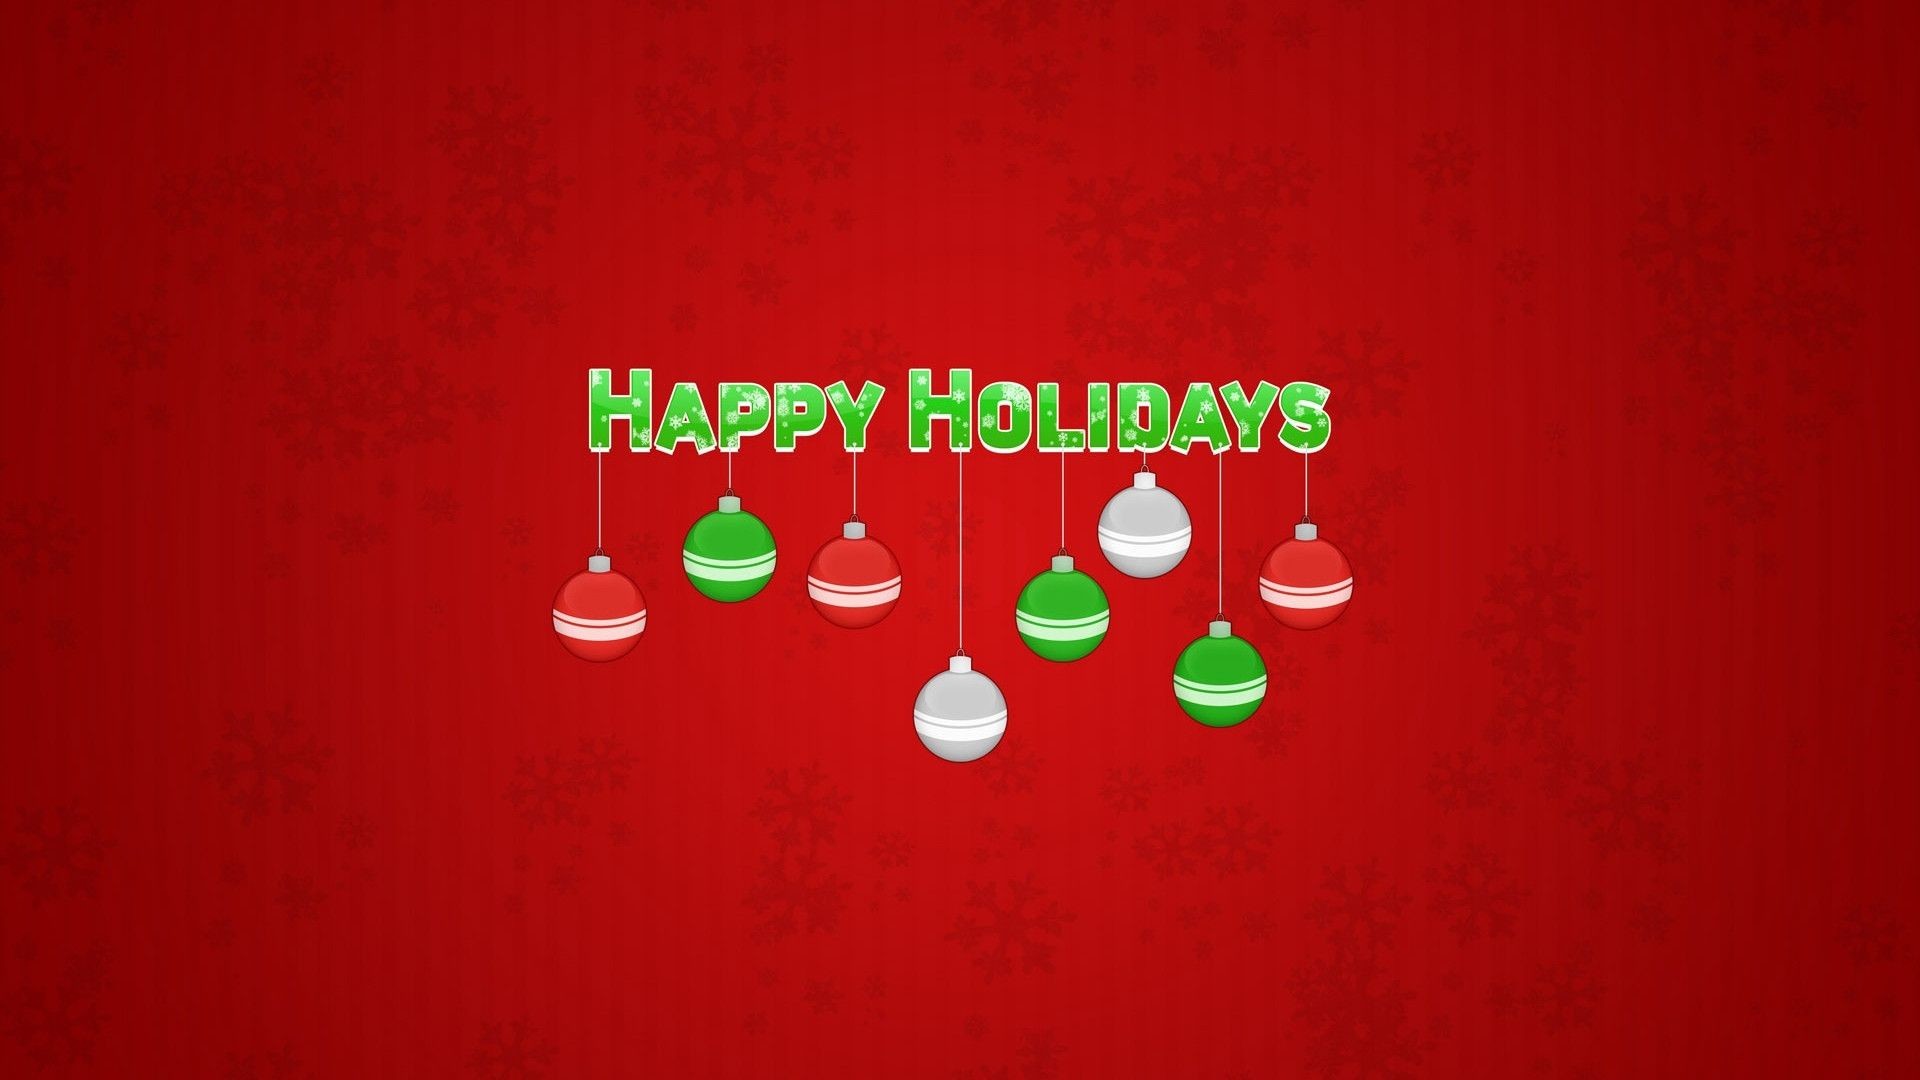 1920x1080 Happy Holiday Wallpapers - Wallpaper Cave